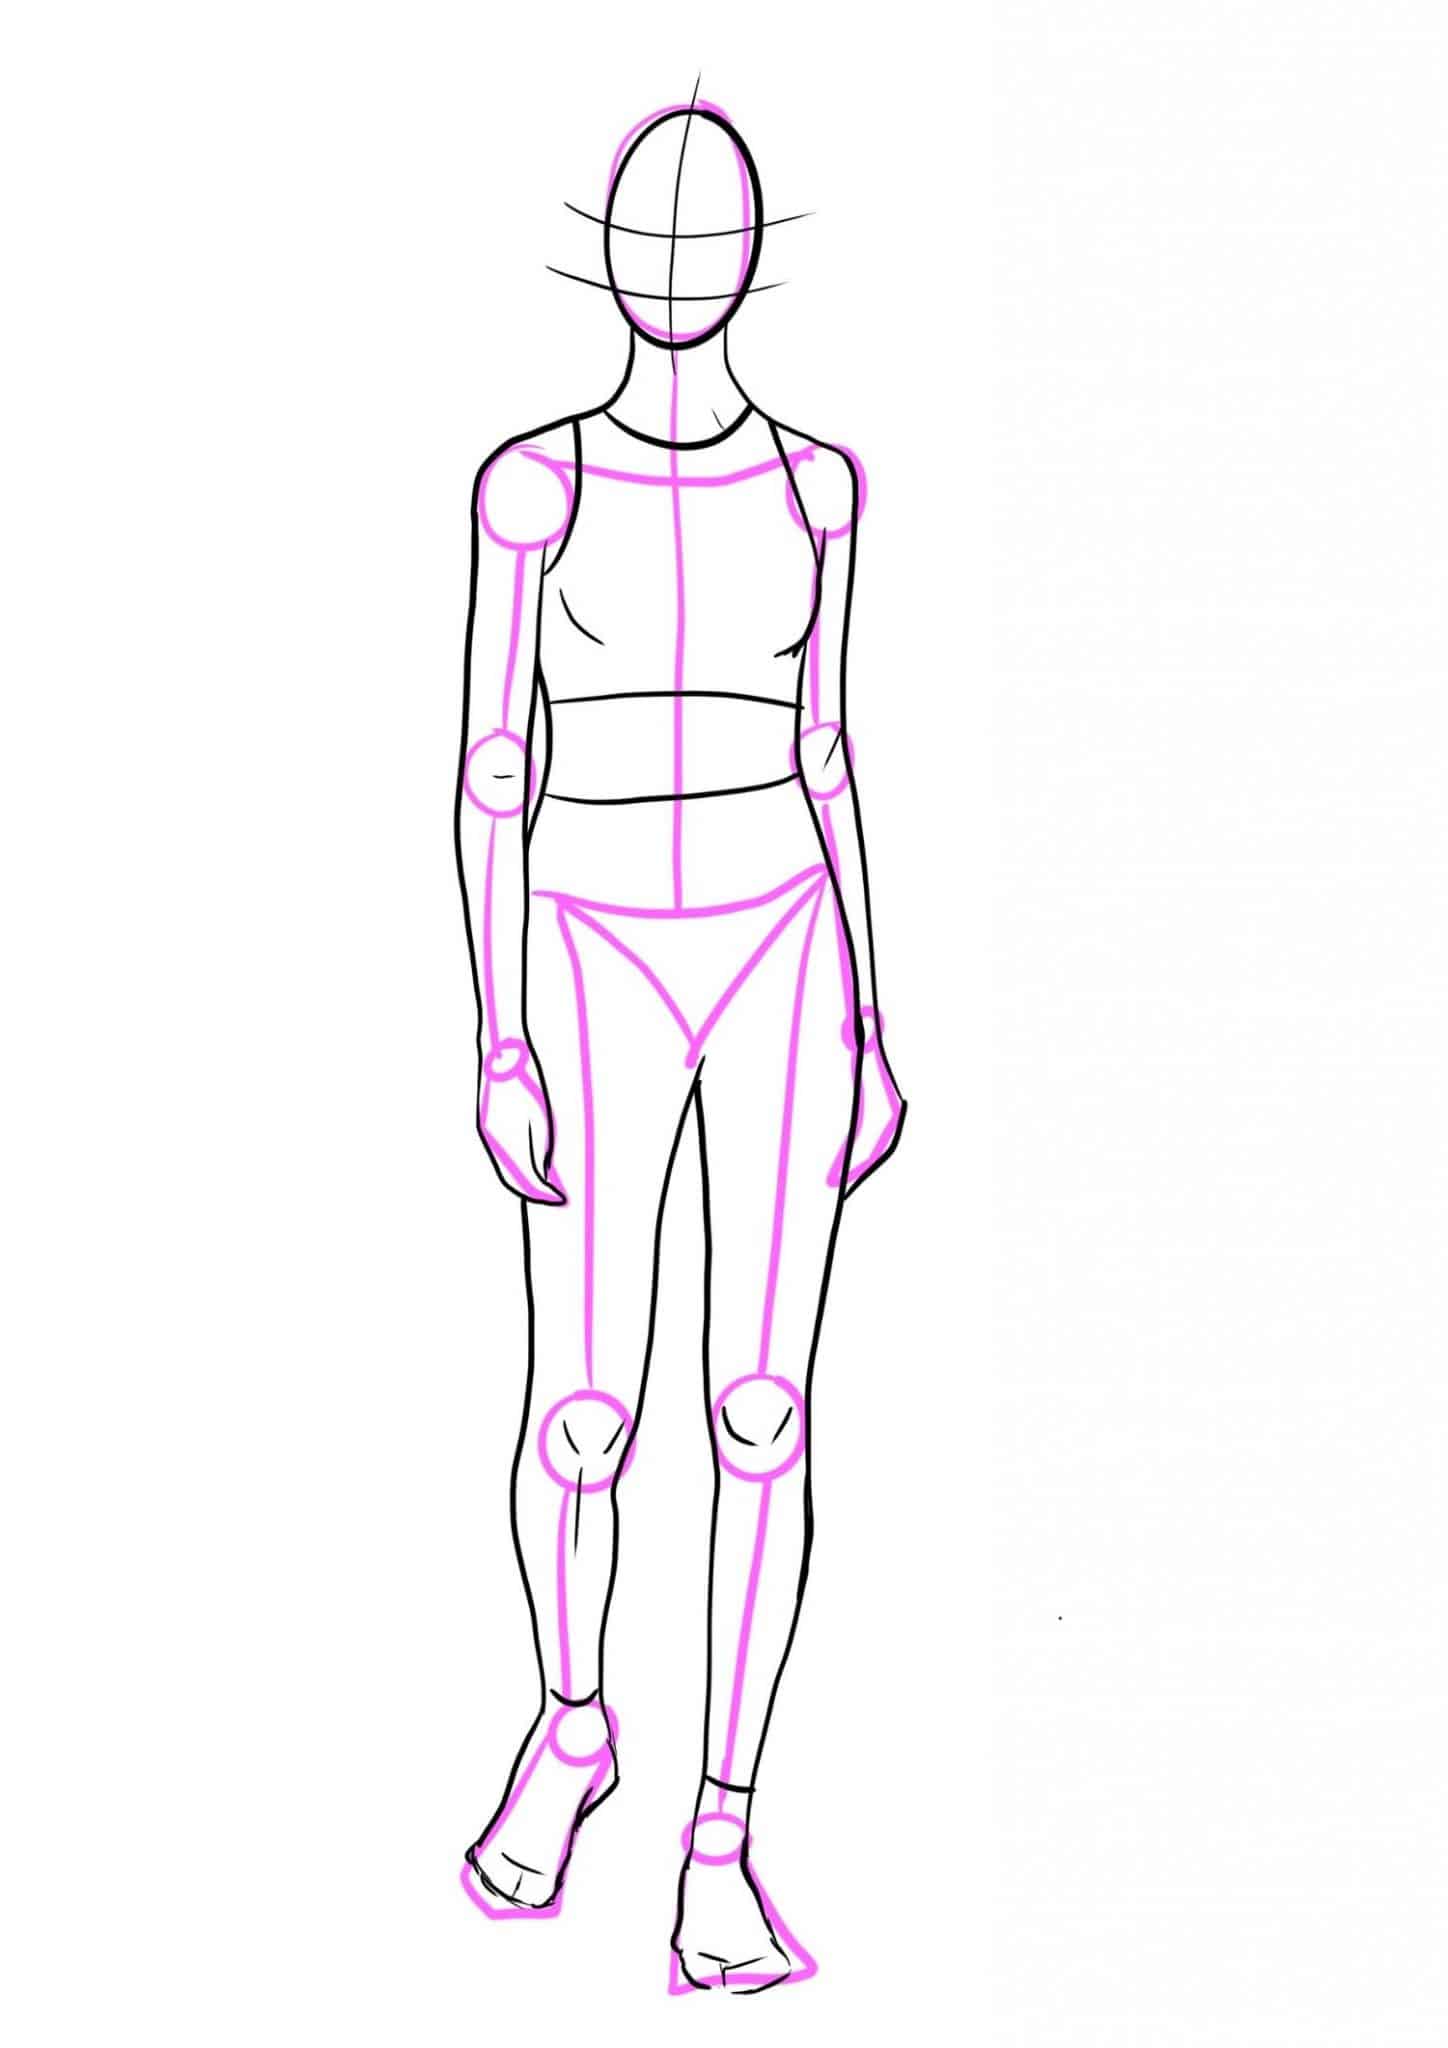 18 Standing Poses Reference How to Draw the Human Figure in a Standing